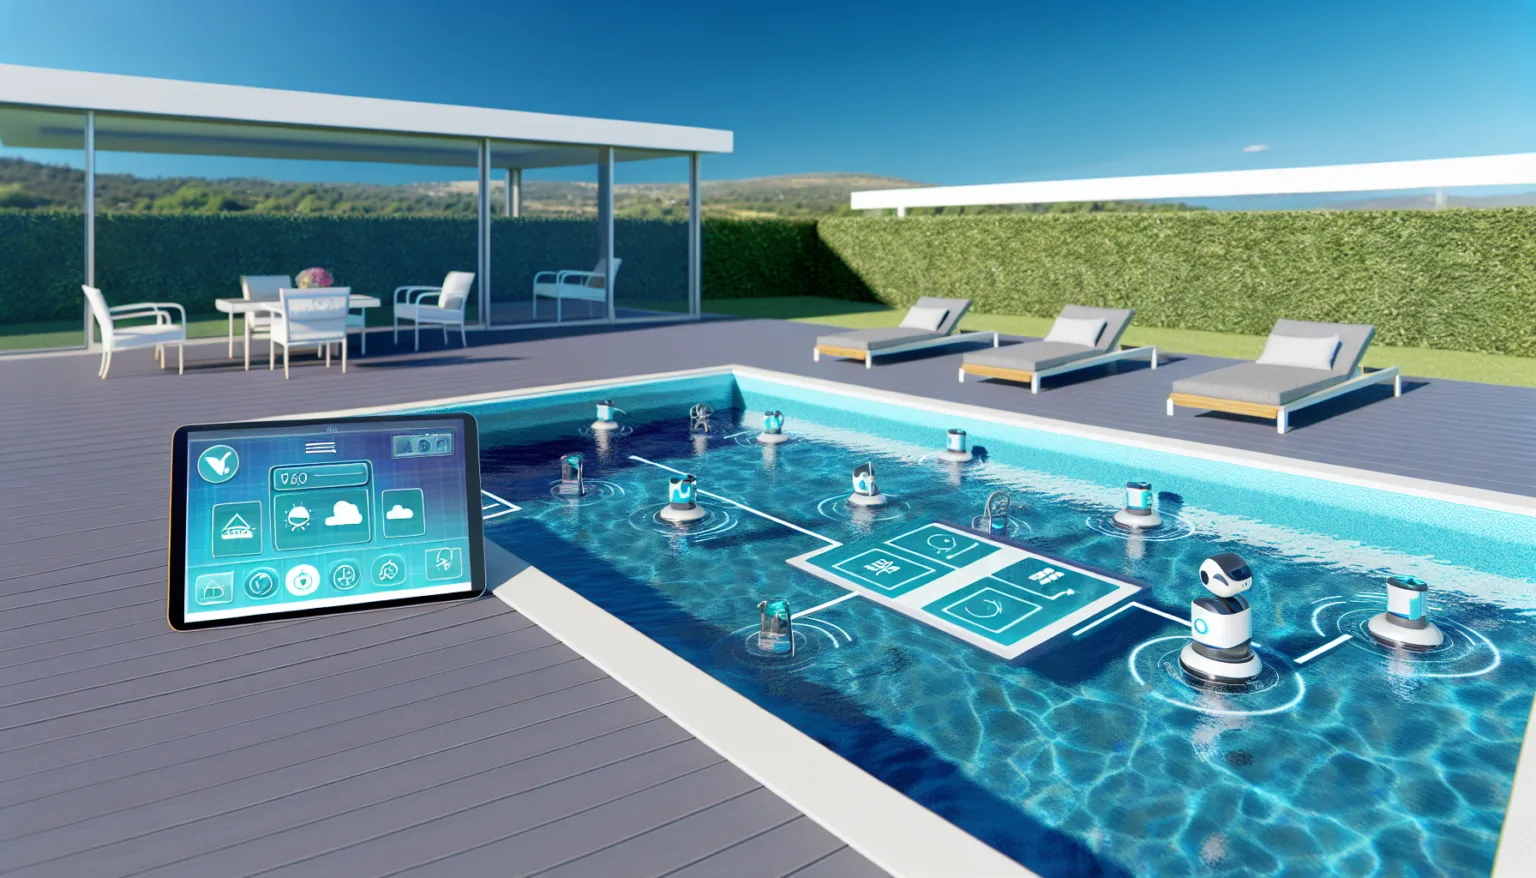 Smart-Pools-Integrating-Technology-for-Convenience-and-Control